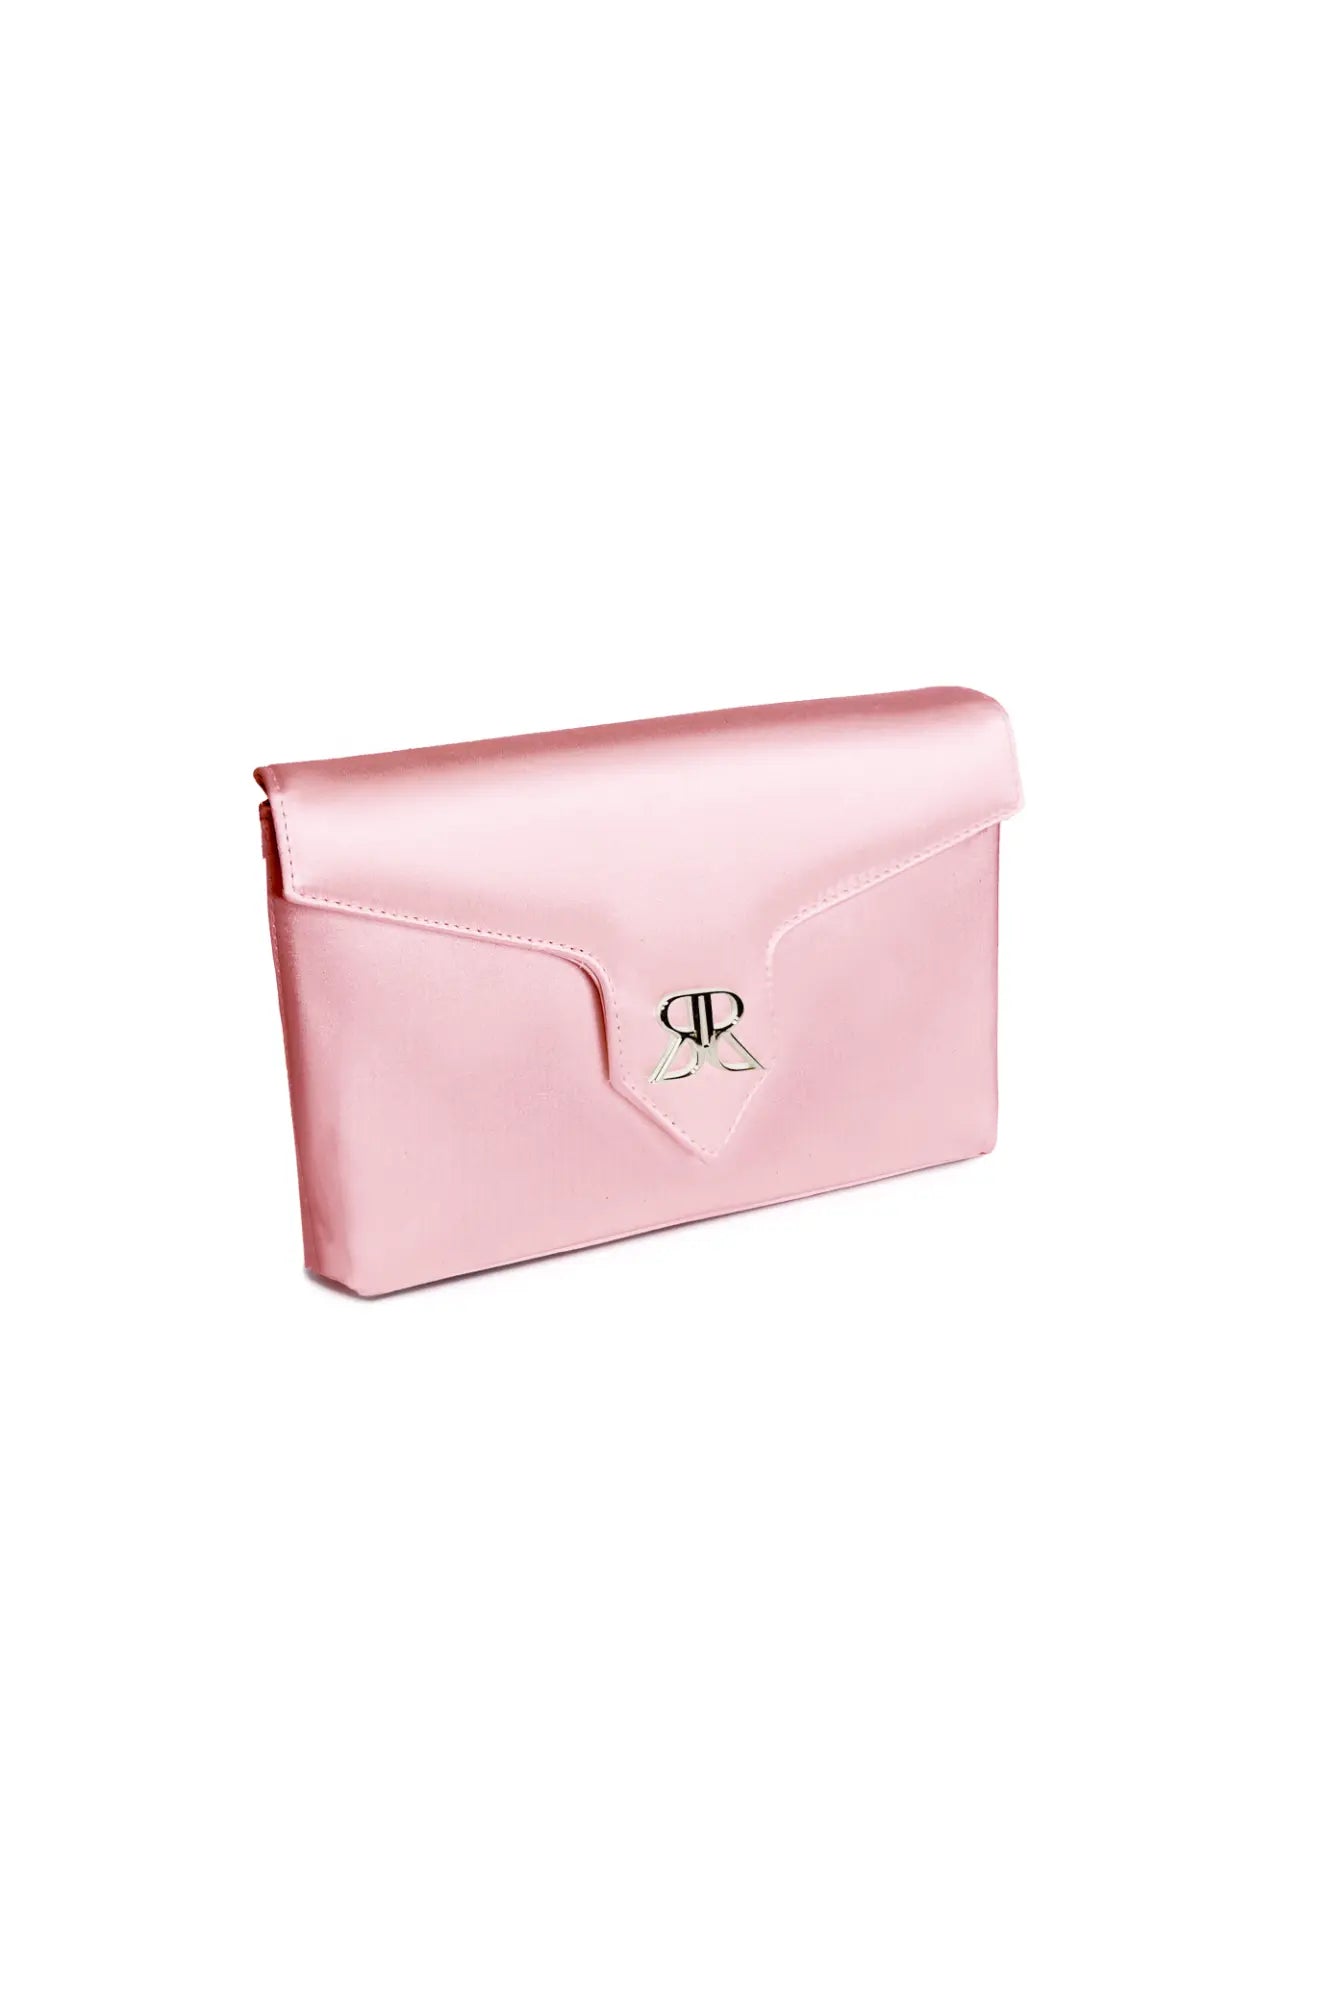 Love Note Envelope Clutch Pink Sky from The Bella Rosa Collection with metallic clasp on white background.